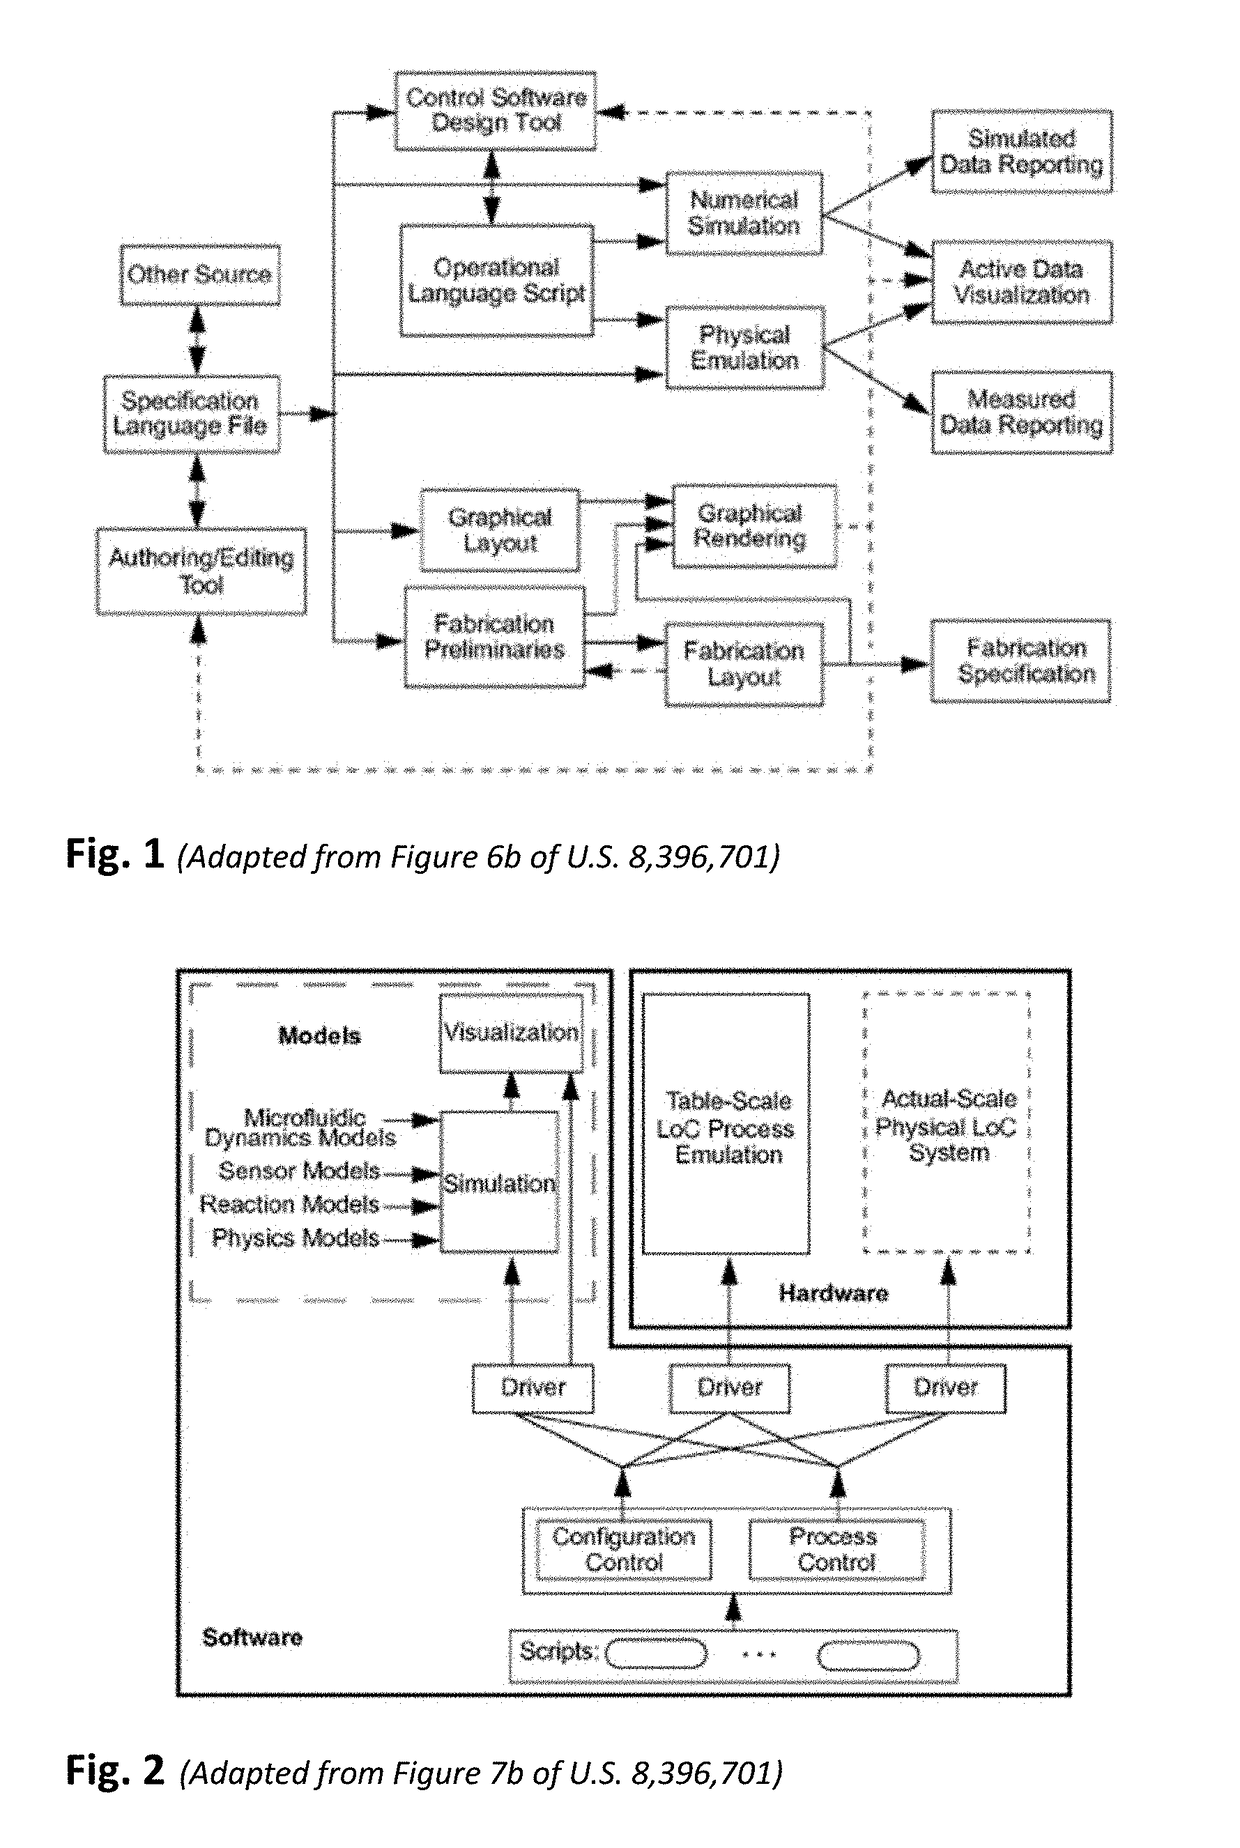 Software controlled transport and operation processes for fluidic and microfluidic systems, temporal and event-driven control sequence scripting, functional libraries, and script creation tools